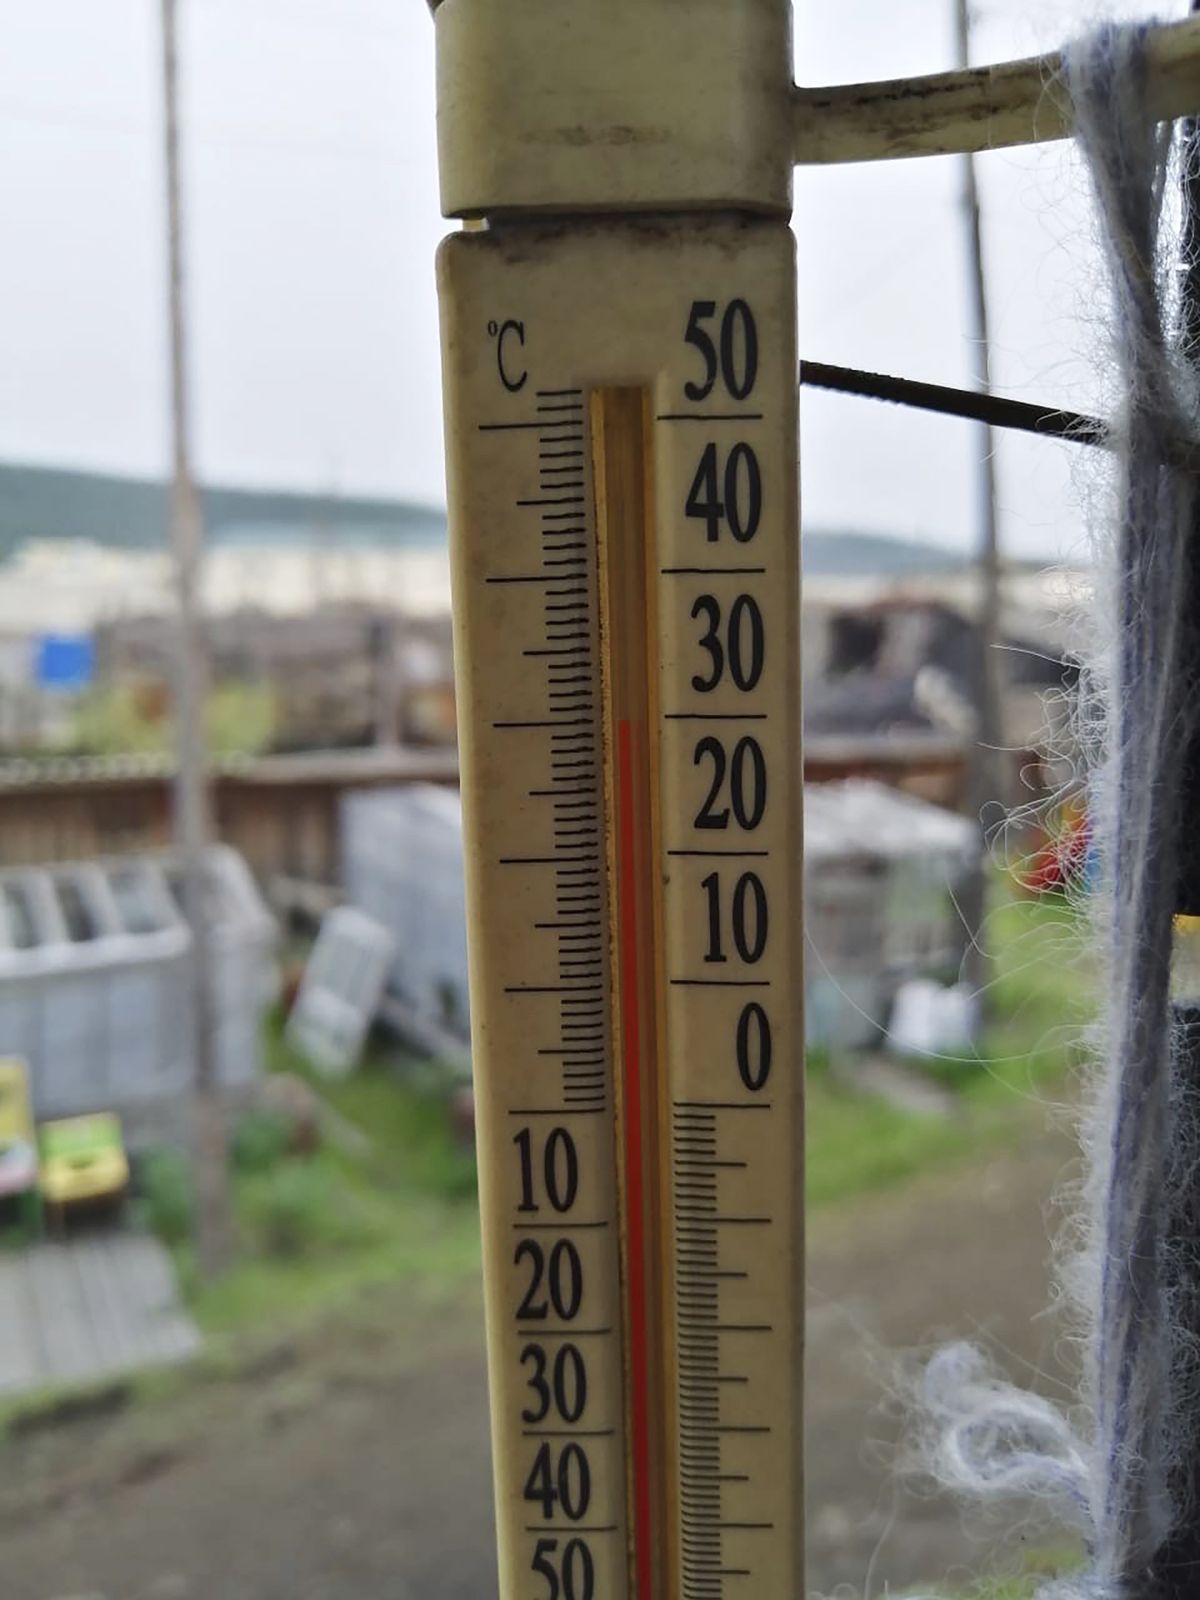 In this handout photo provided by Olga Burtseva, an outside thermometer shows 30 Celsius (86 F) around 11 p.m in Verkhoyansk, the Sakha Republic, about 4660 kilometers (2900 miles) northeast of Moscow, Russia, Sunday, June 21, 2020. A Siberian town that endures the world